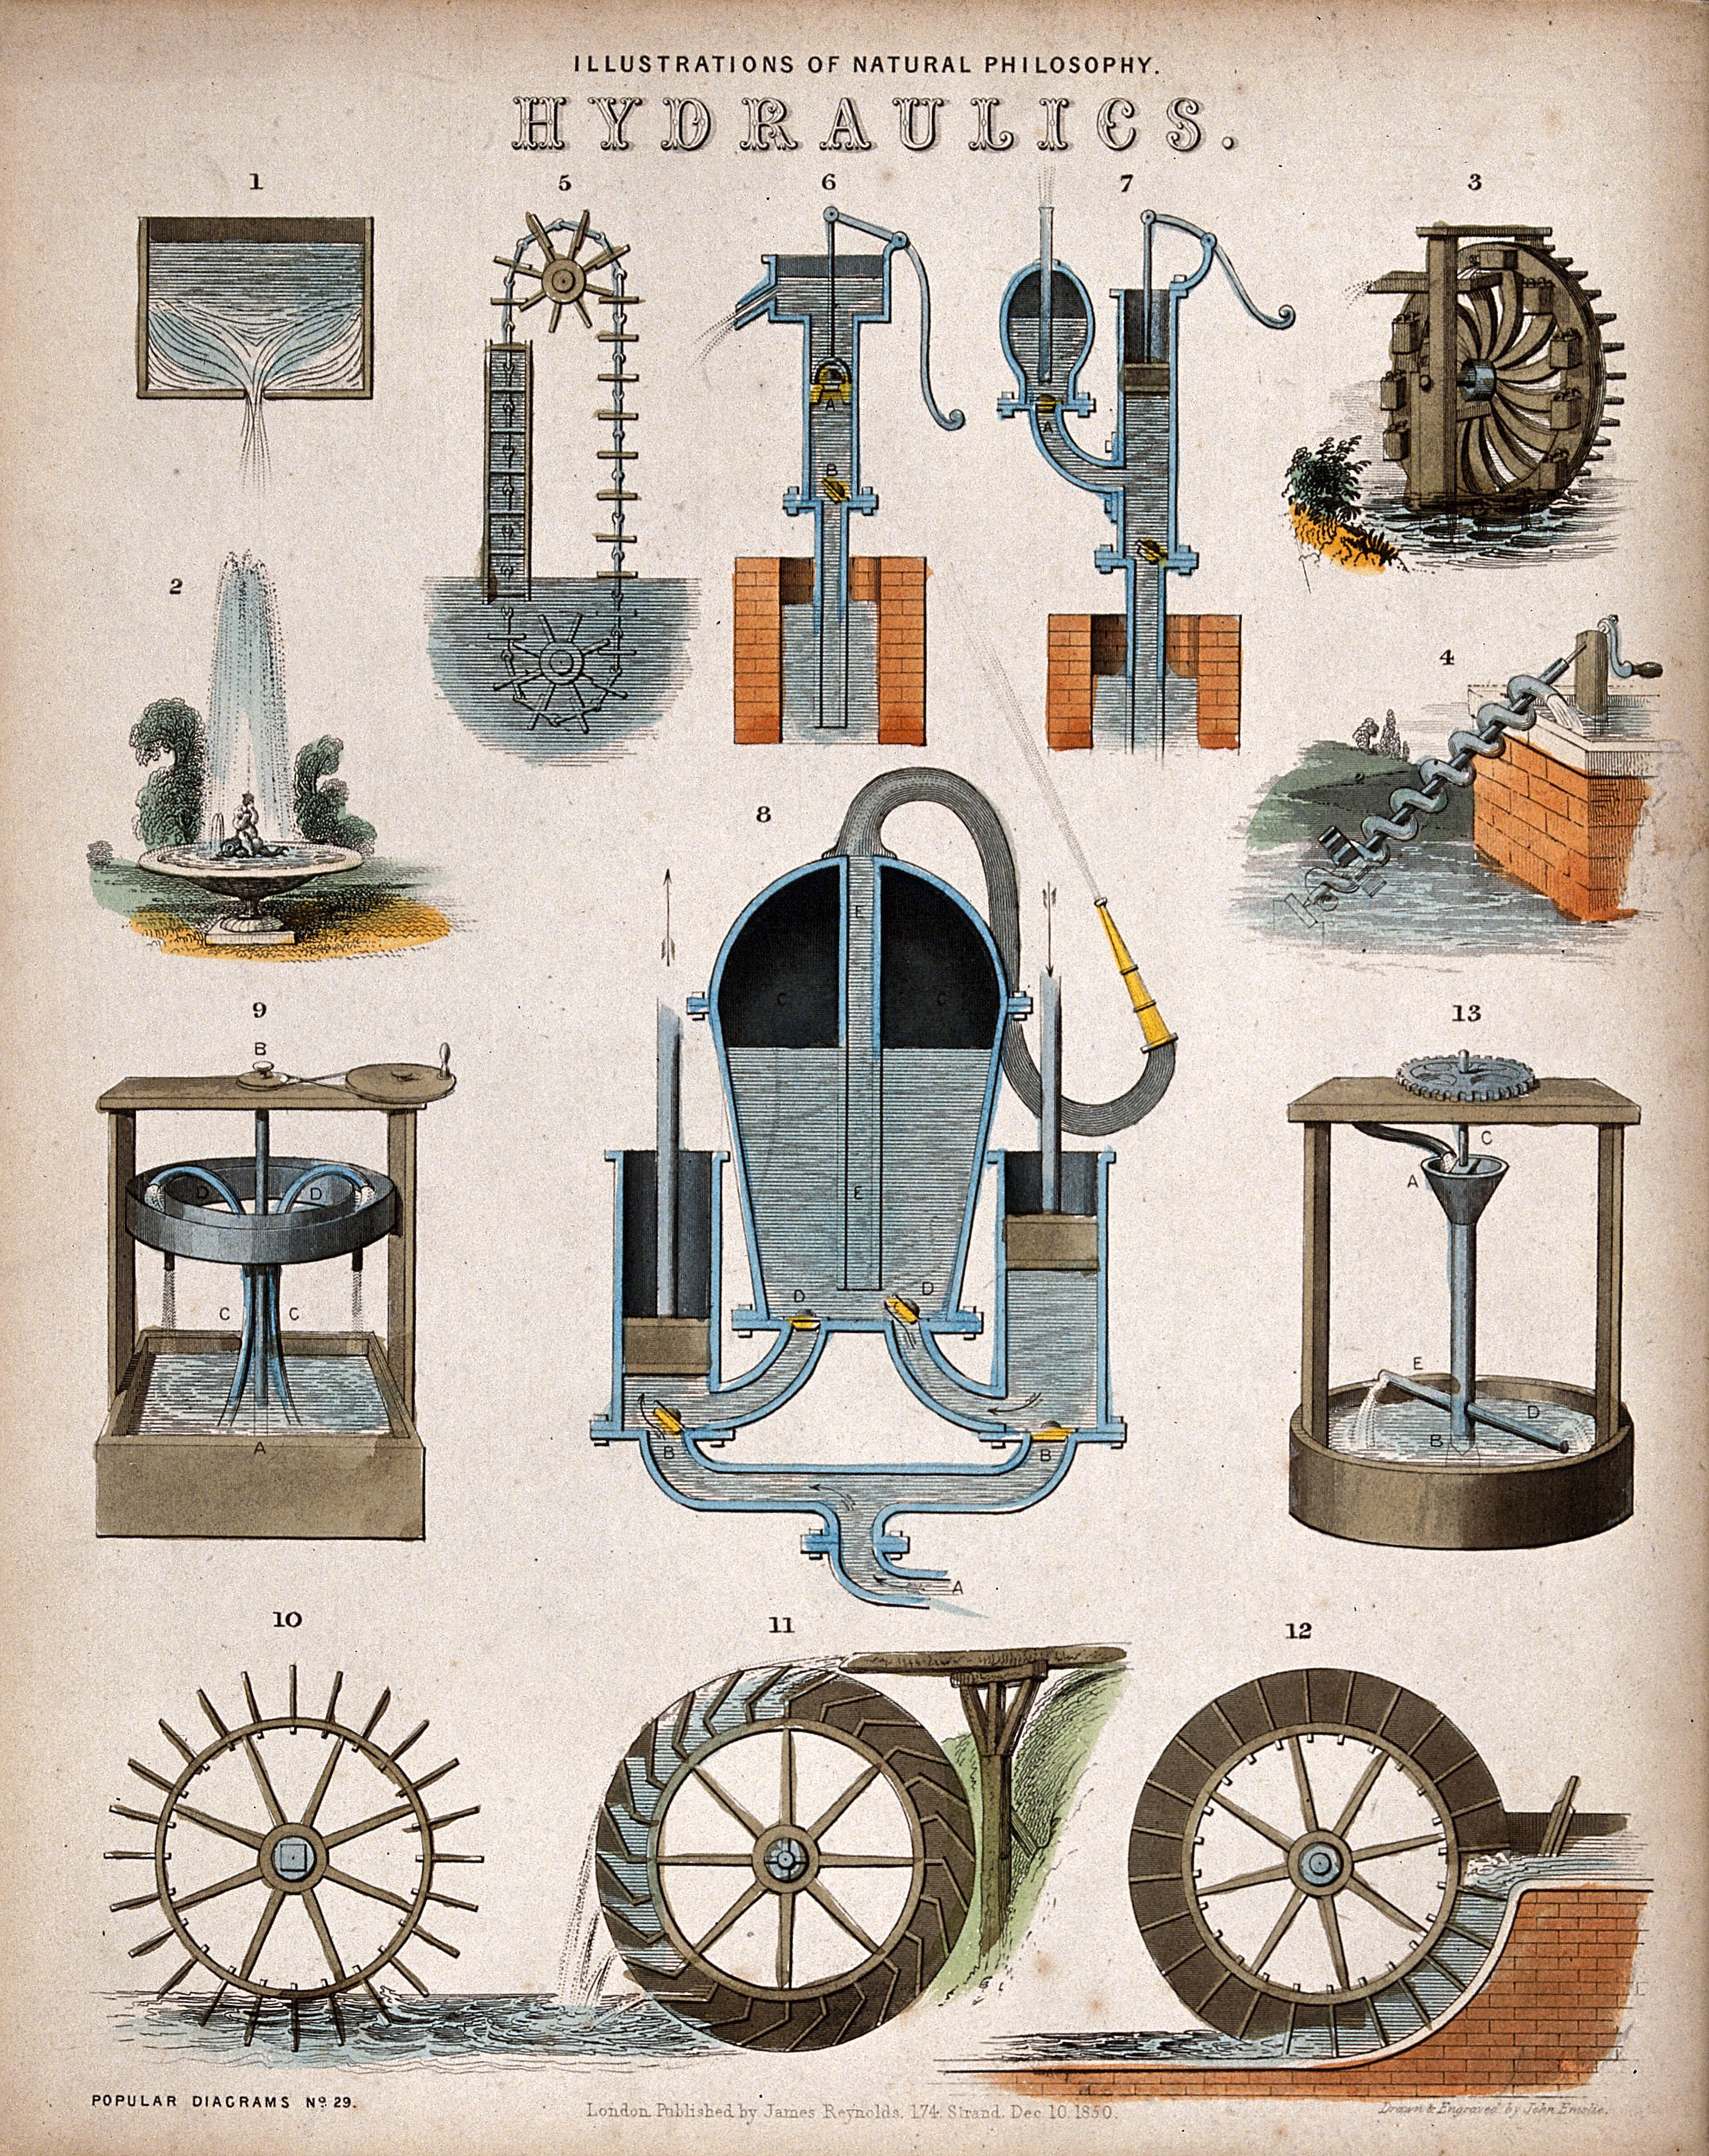 Hydraulics: pumps and water-wheels. Coloured engraving by J. Emslie after himself, 1850.